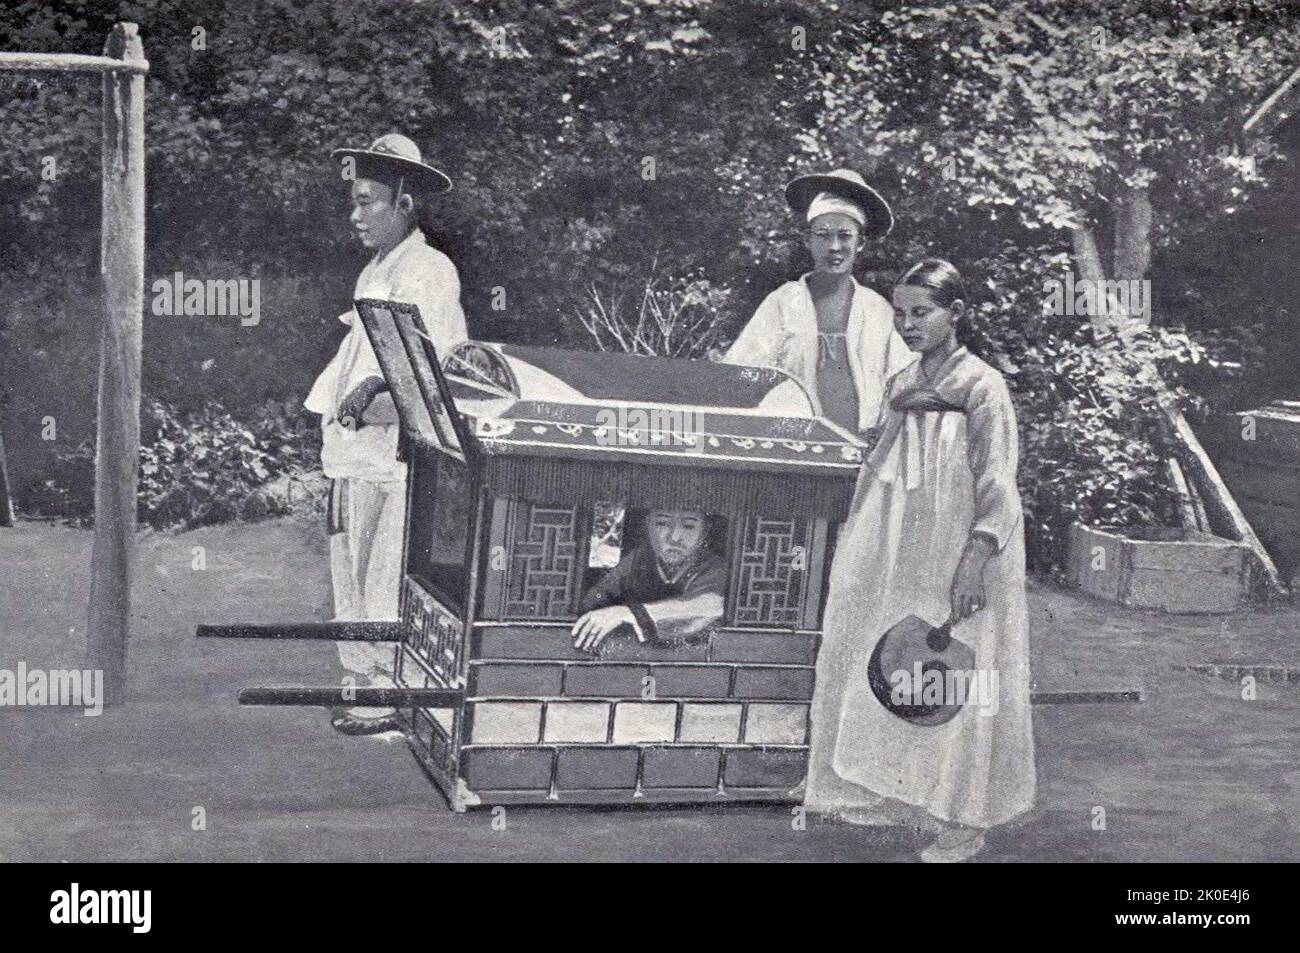 Joseon era aristocrat carried in a litter by two servants and escorted by a maid, Korea, 1900. Stock Photo